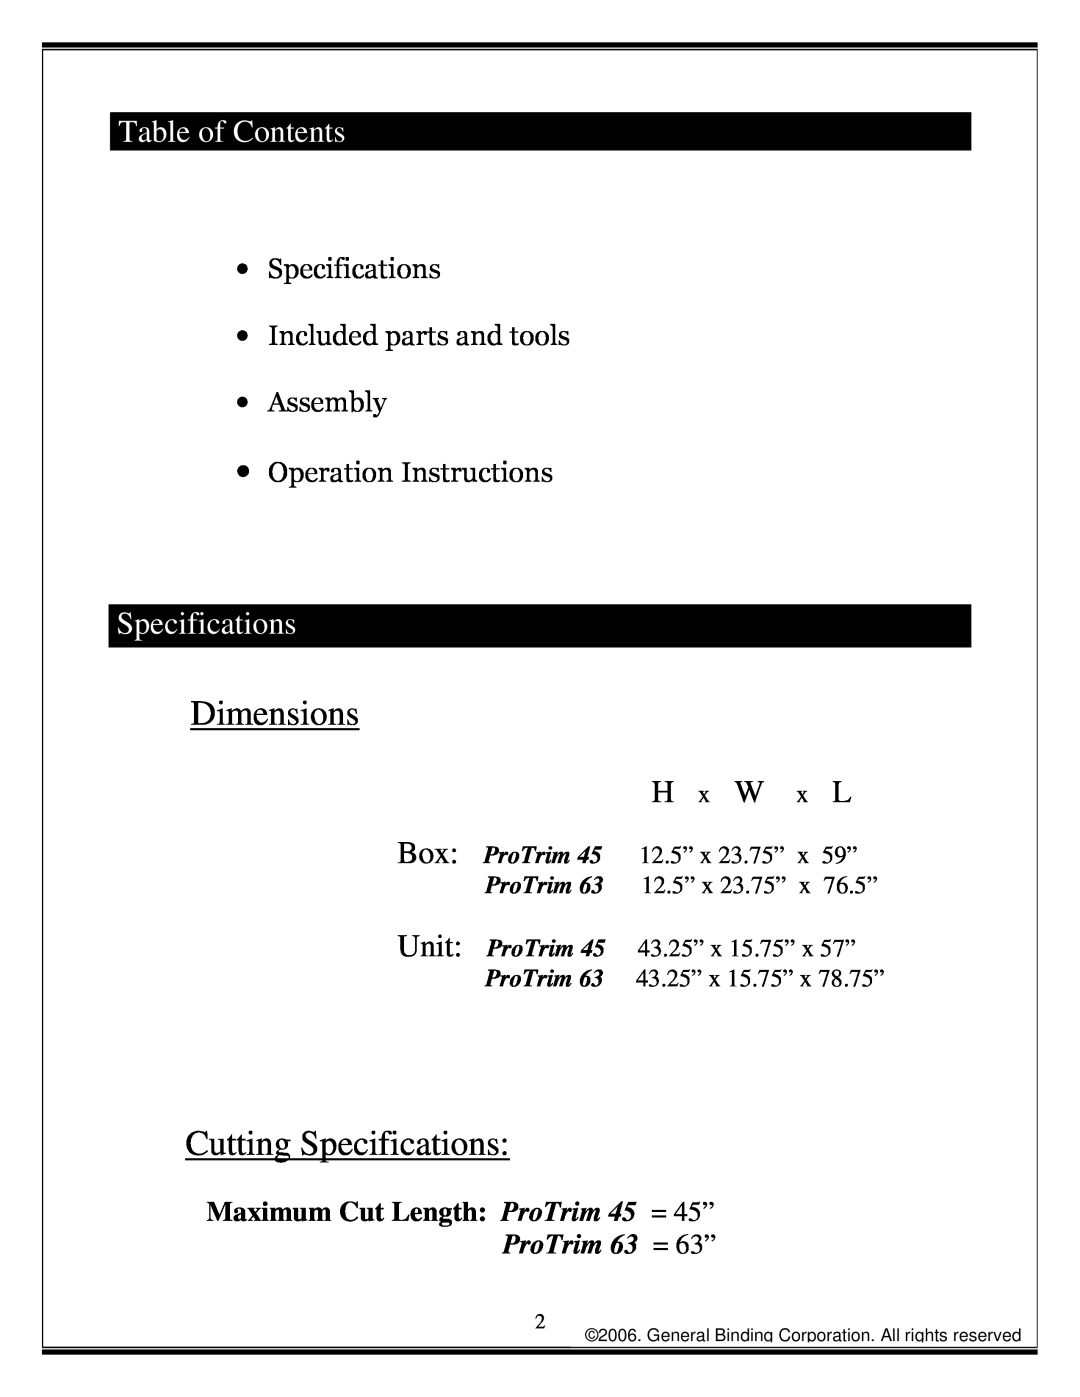 GBC 45 manual Table of Contents, Box Unit, H x W x L, Dimensions, Cutting Specifications, Operation Instructions 